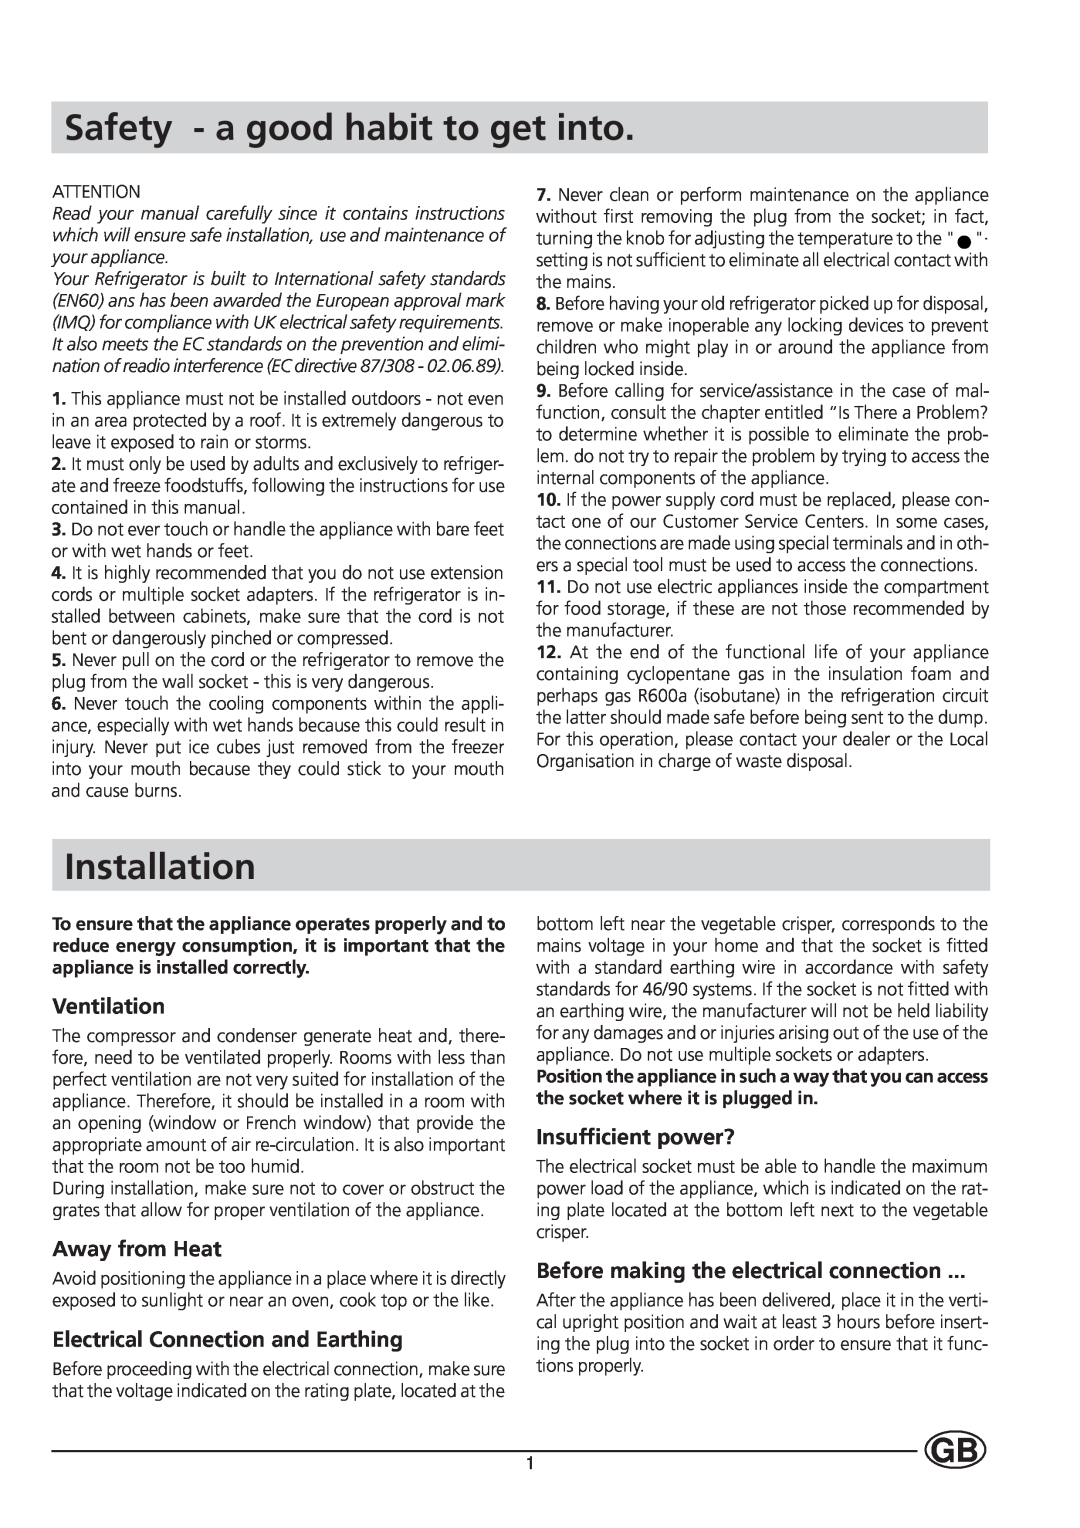 Indesit IN-C 3100 manual Safety - a good habit to get into, Installation, Ventilation, Away from Heat, Insufficient power? 